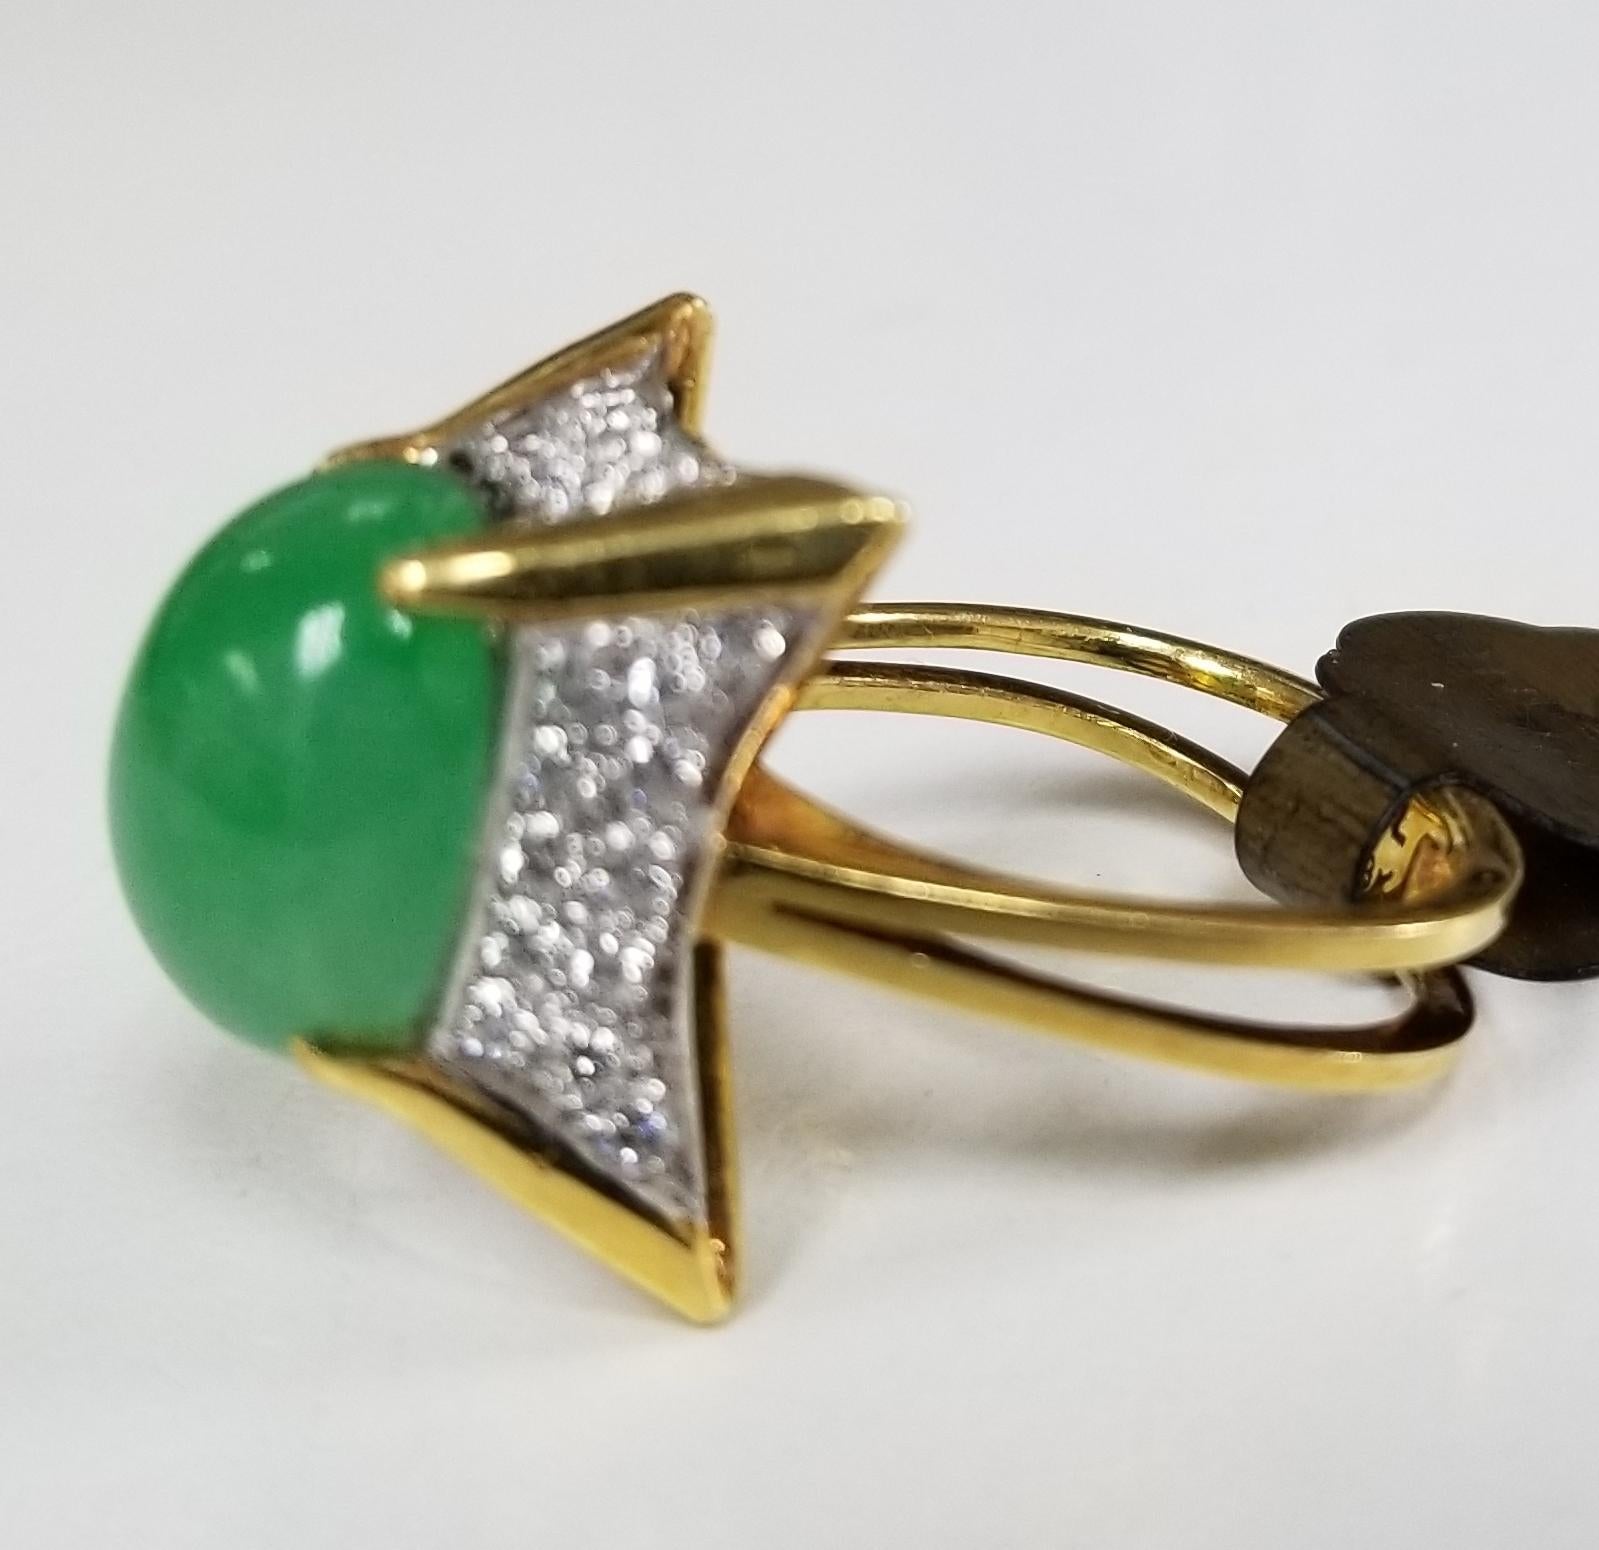 This piece of fine jewelry was designed and hand crafted by “Moshi” of New York, it was found in a vault from an estate sale and was never used.  18k yellow gold jade and diamond ring, containing 1 oval cabochon jade 13 x 9.5 mm and 40 round full